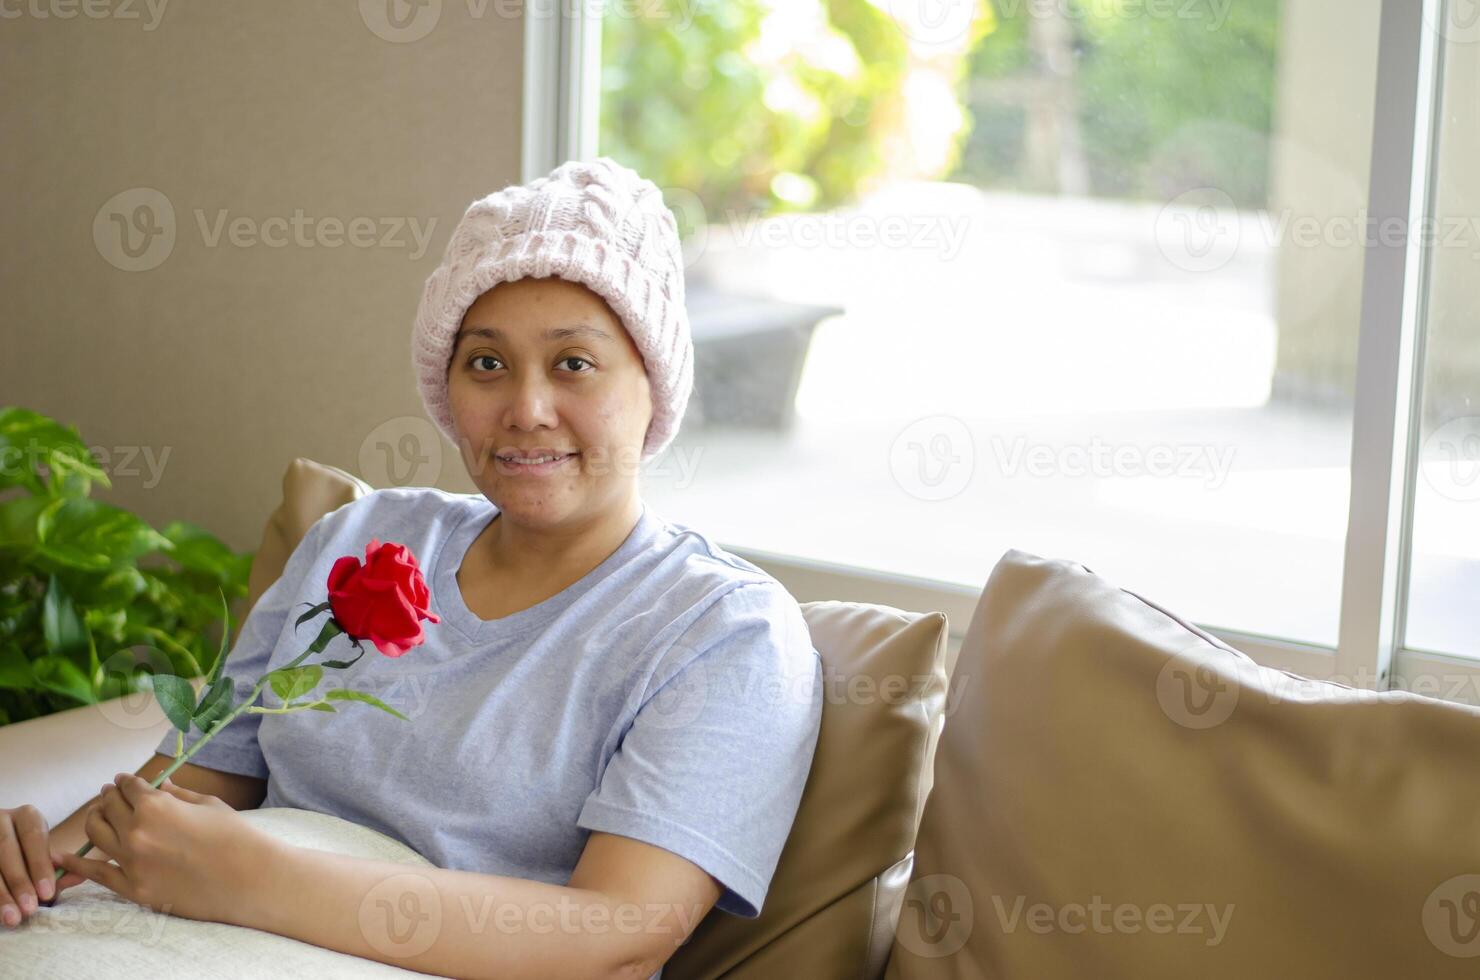 Asian woman with cancer, she smiles happily, receives good support photo